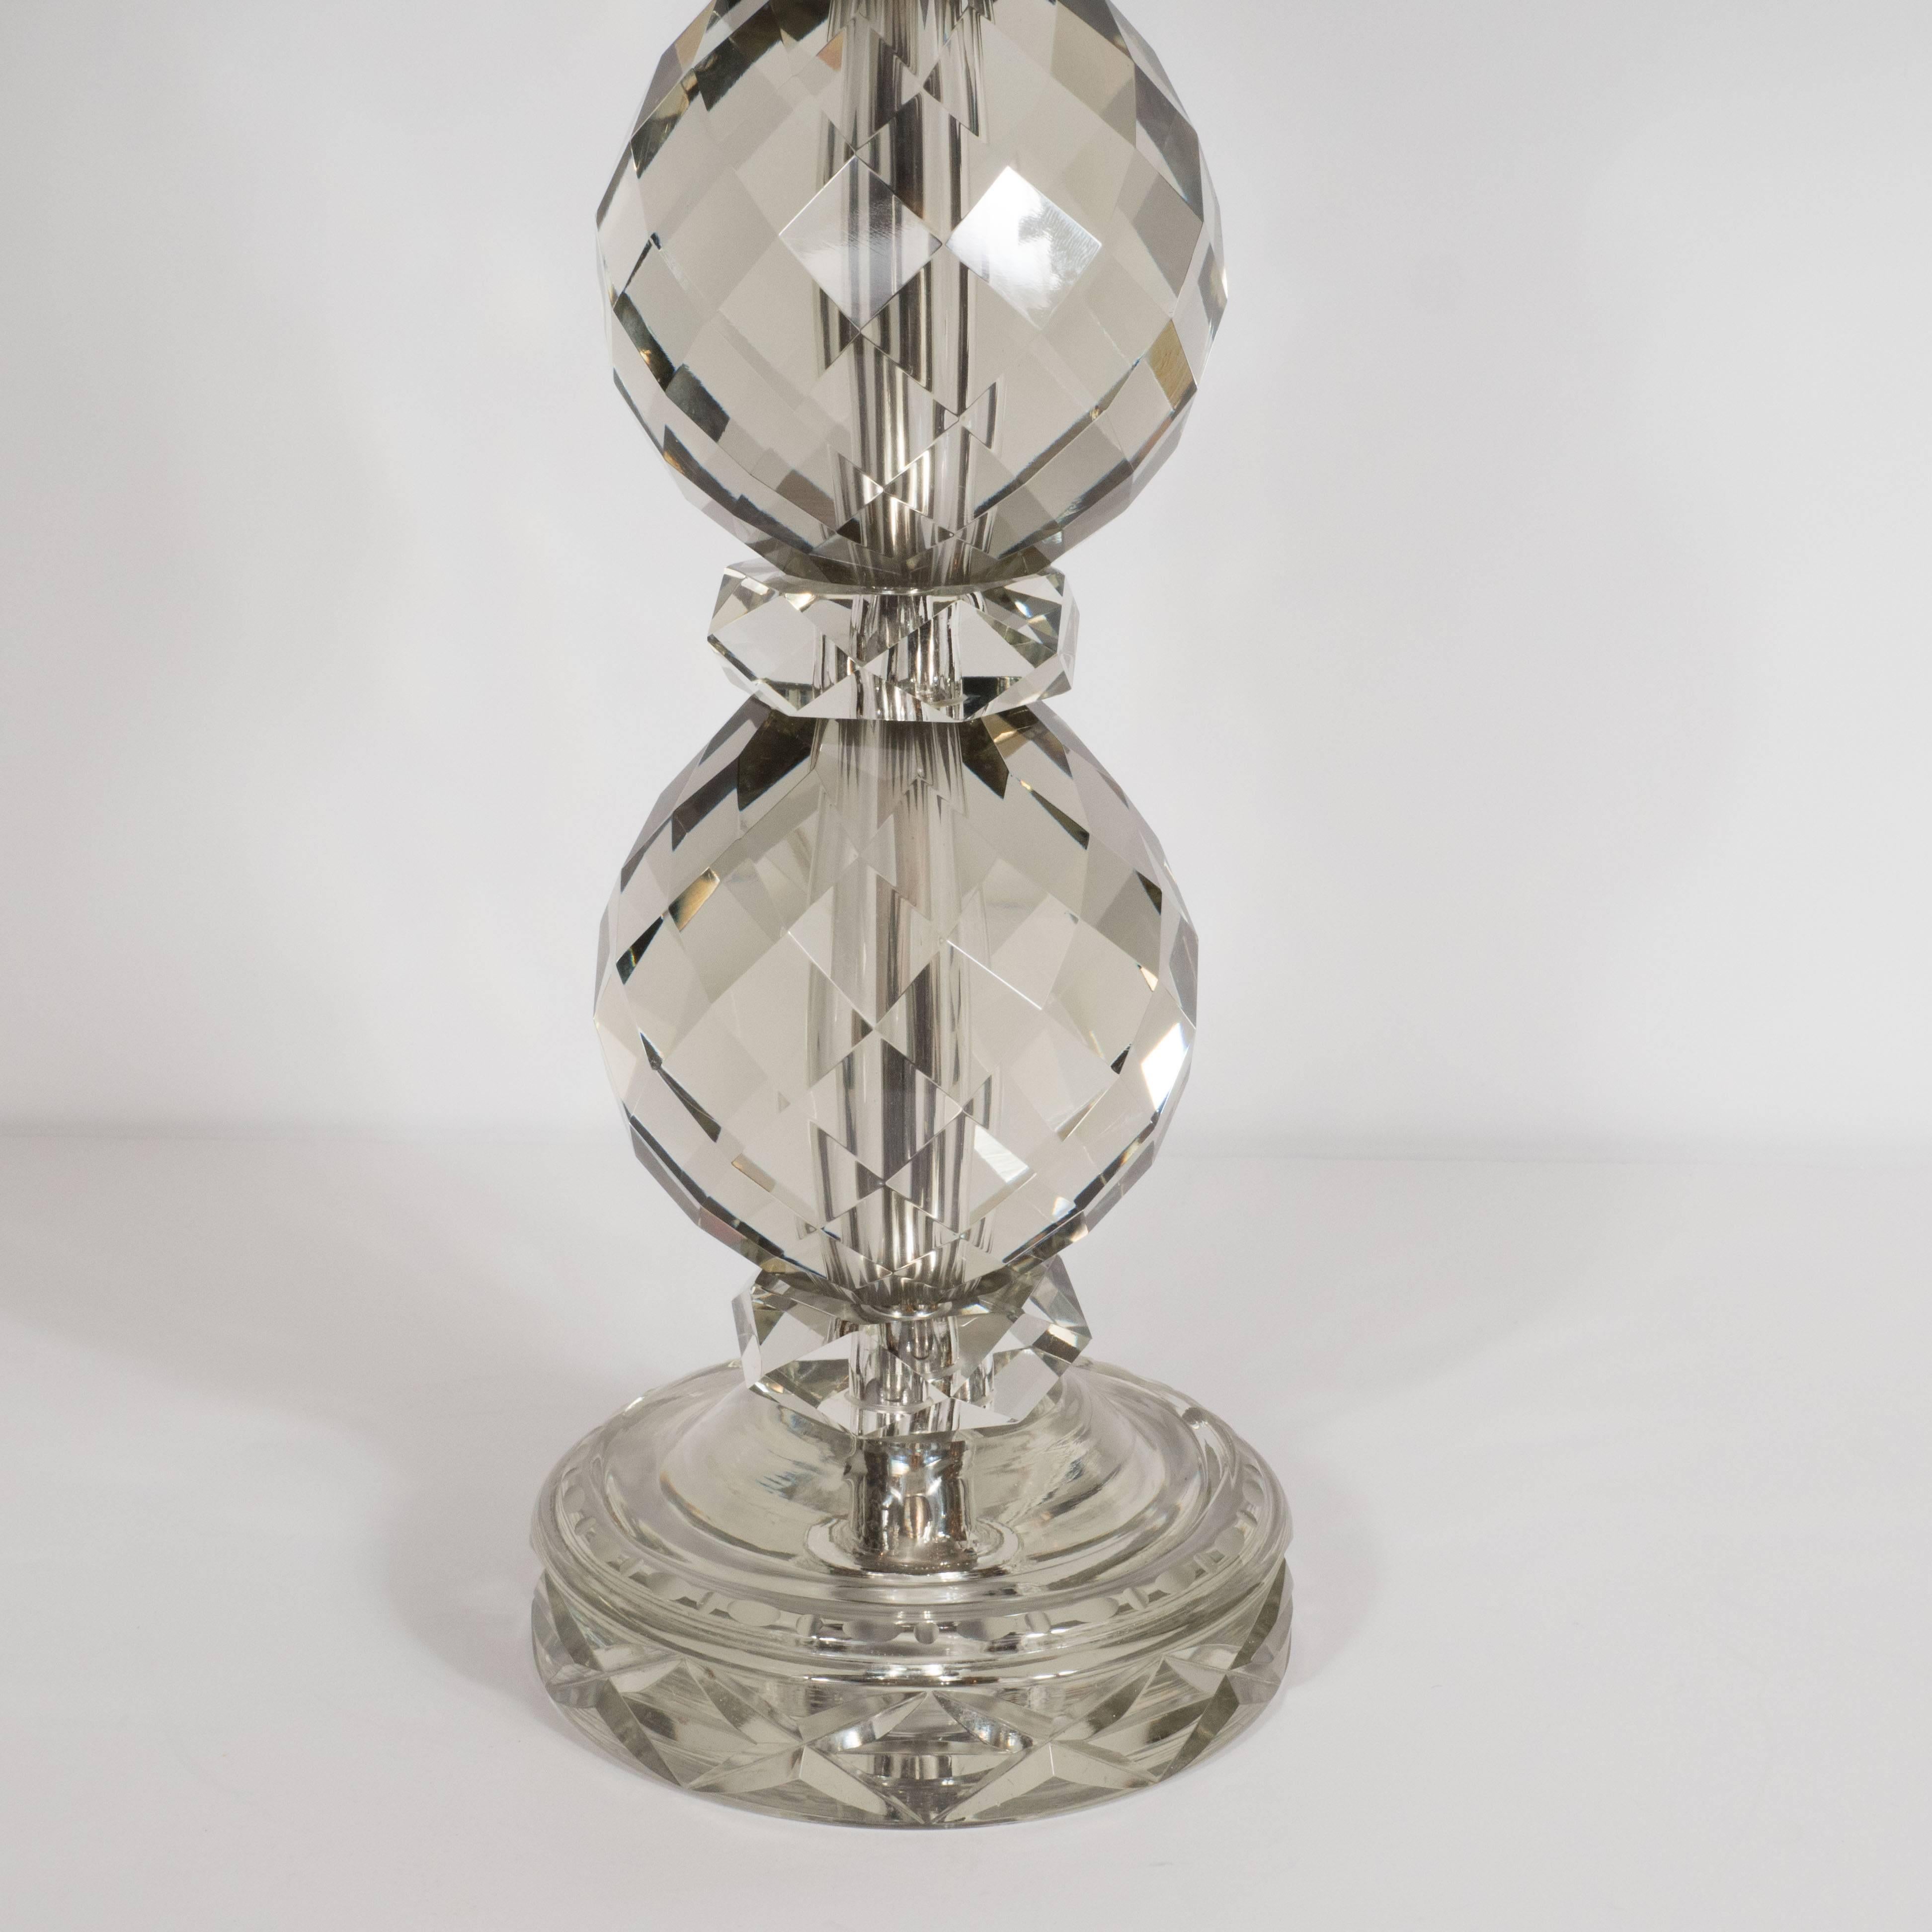 This elegant pair of table lamps features features four crystal globes with beveled sides around a central rod with circular beveled spacers between them. Each of the smoked crystal forms feature diamond shape hand beveled forms, evident in the fact